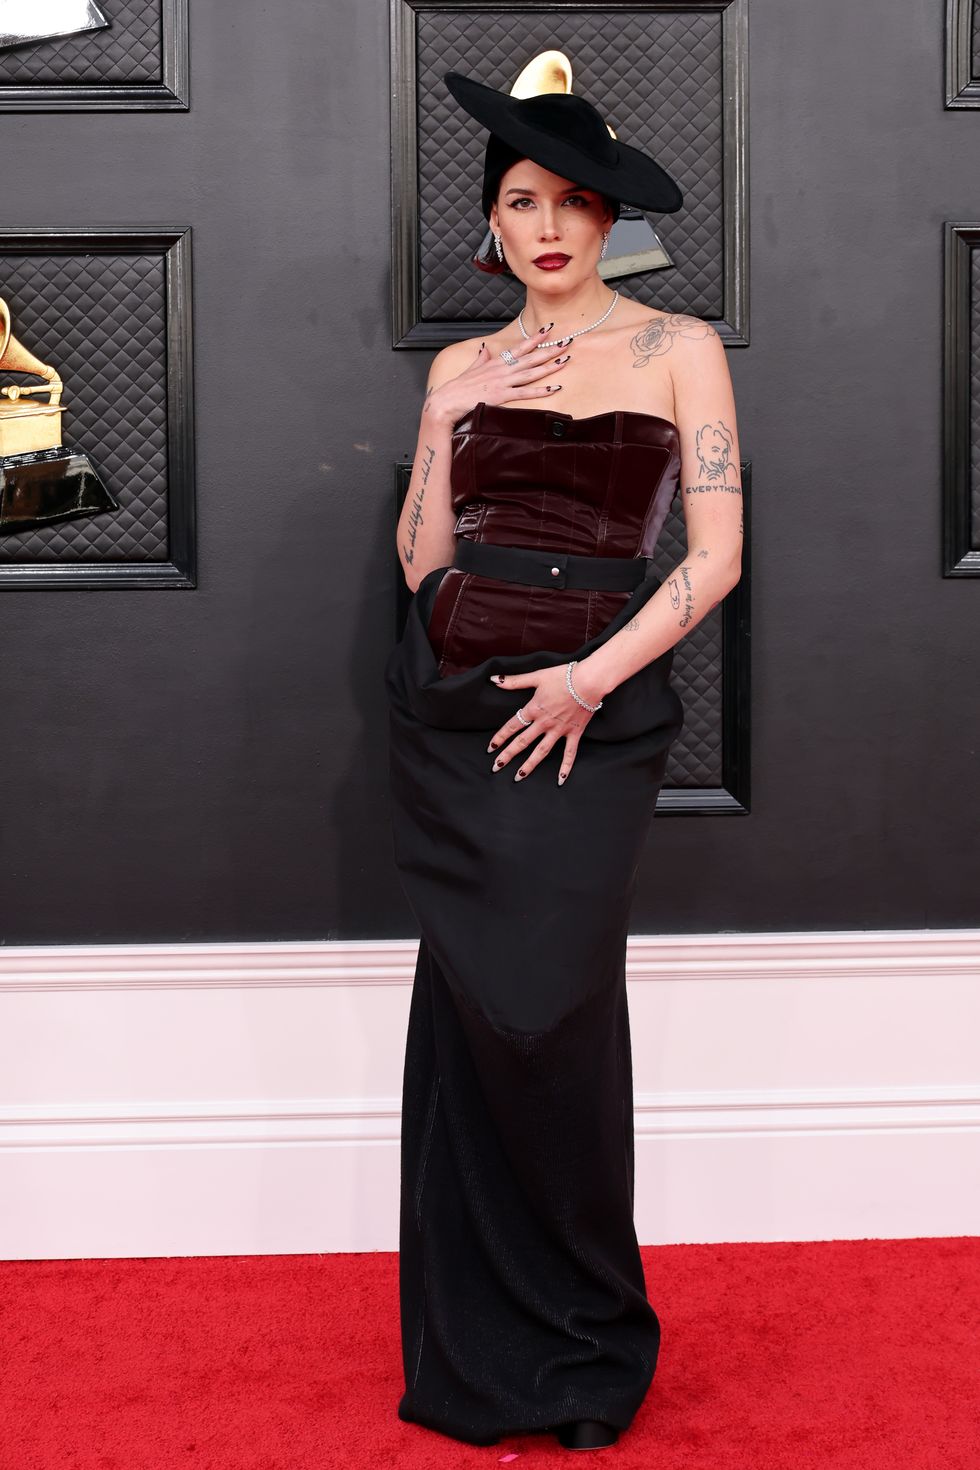 Grammys 2022: the best and worst dressed celebrities – from BTS' Louis  Vuitton suits and Olivia Rodrigo's body-hugging Vivienne Westwood dress, to  Billie Eilish's offbeat Rick Owens ensemble and Tayla Parx's questionable